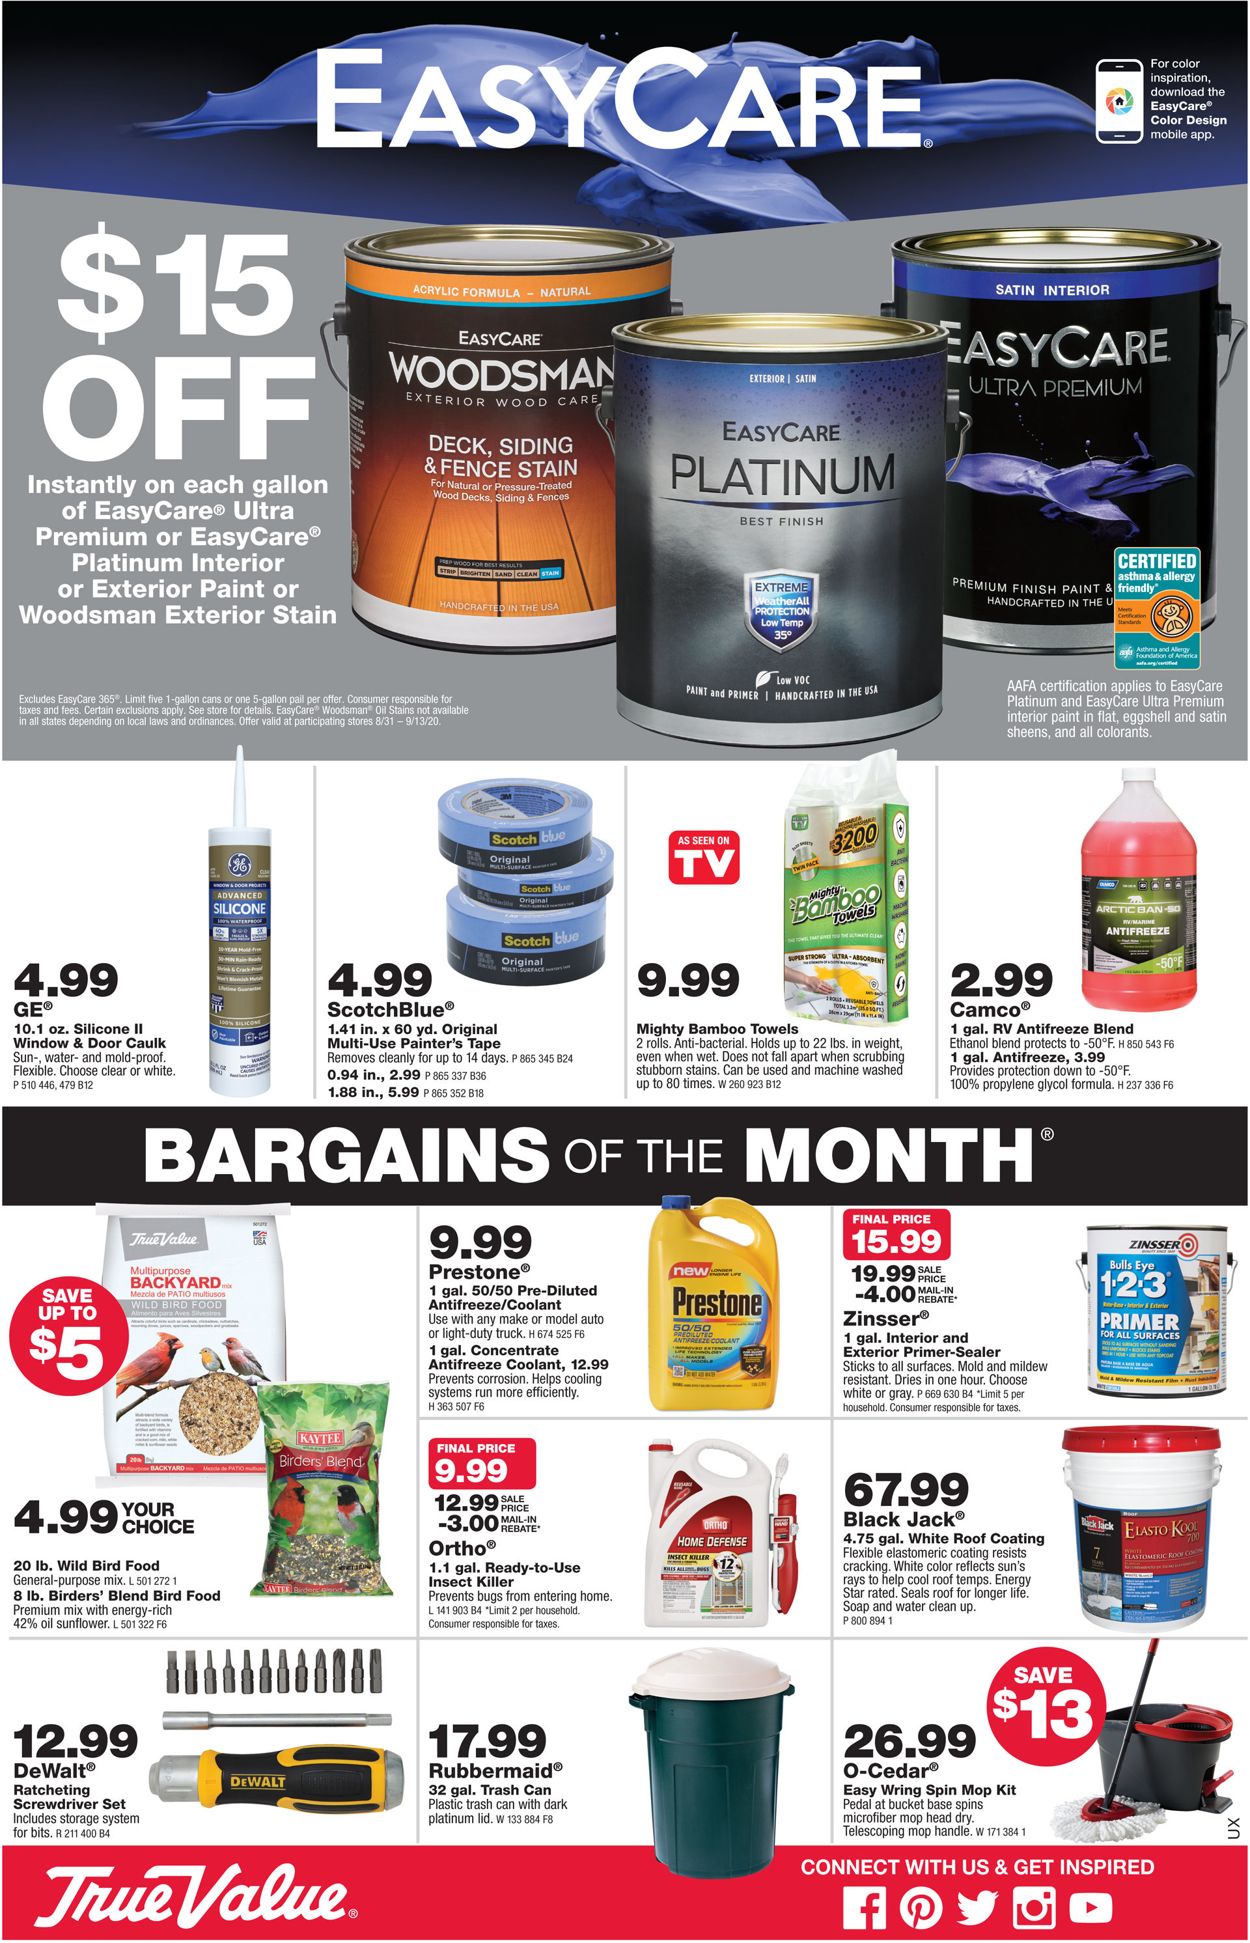 True Value Hardware Current weekly ad 08/31 09/13/2020 [4] frequent